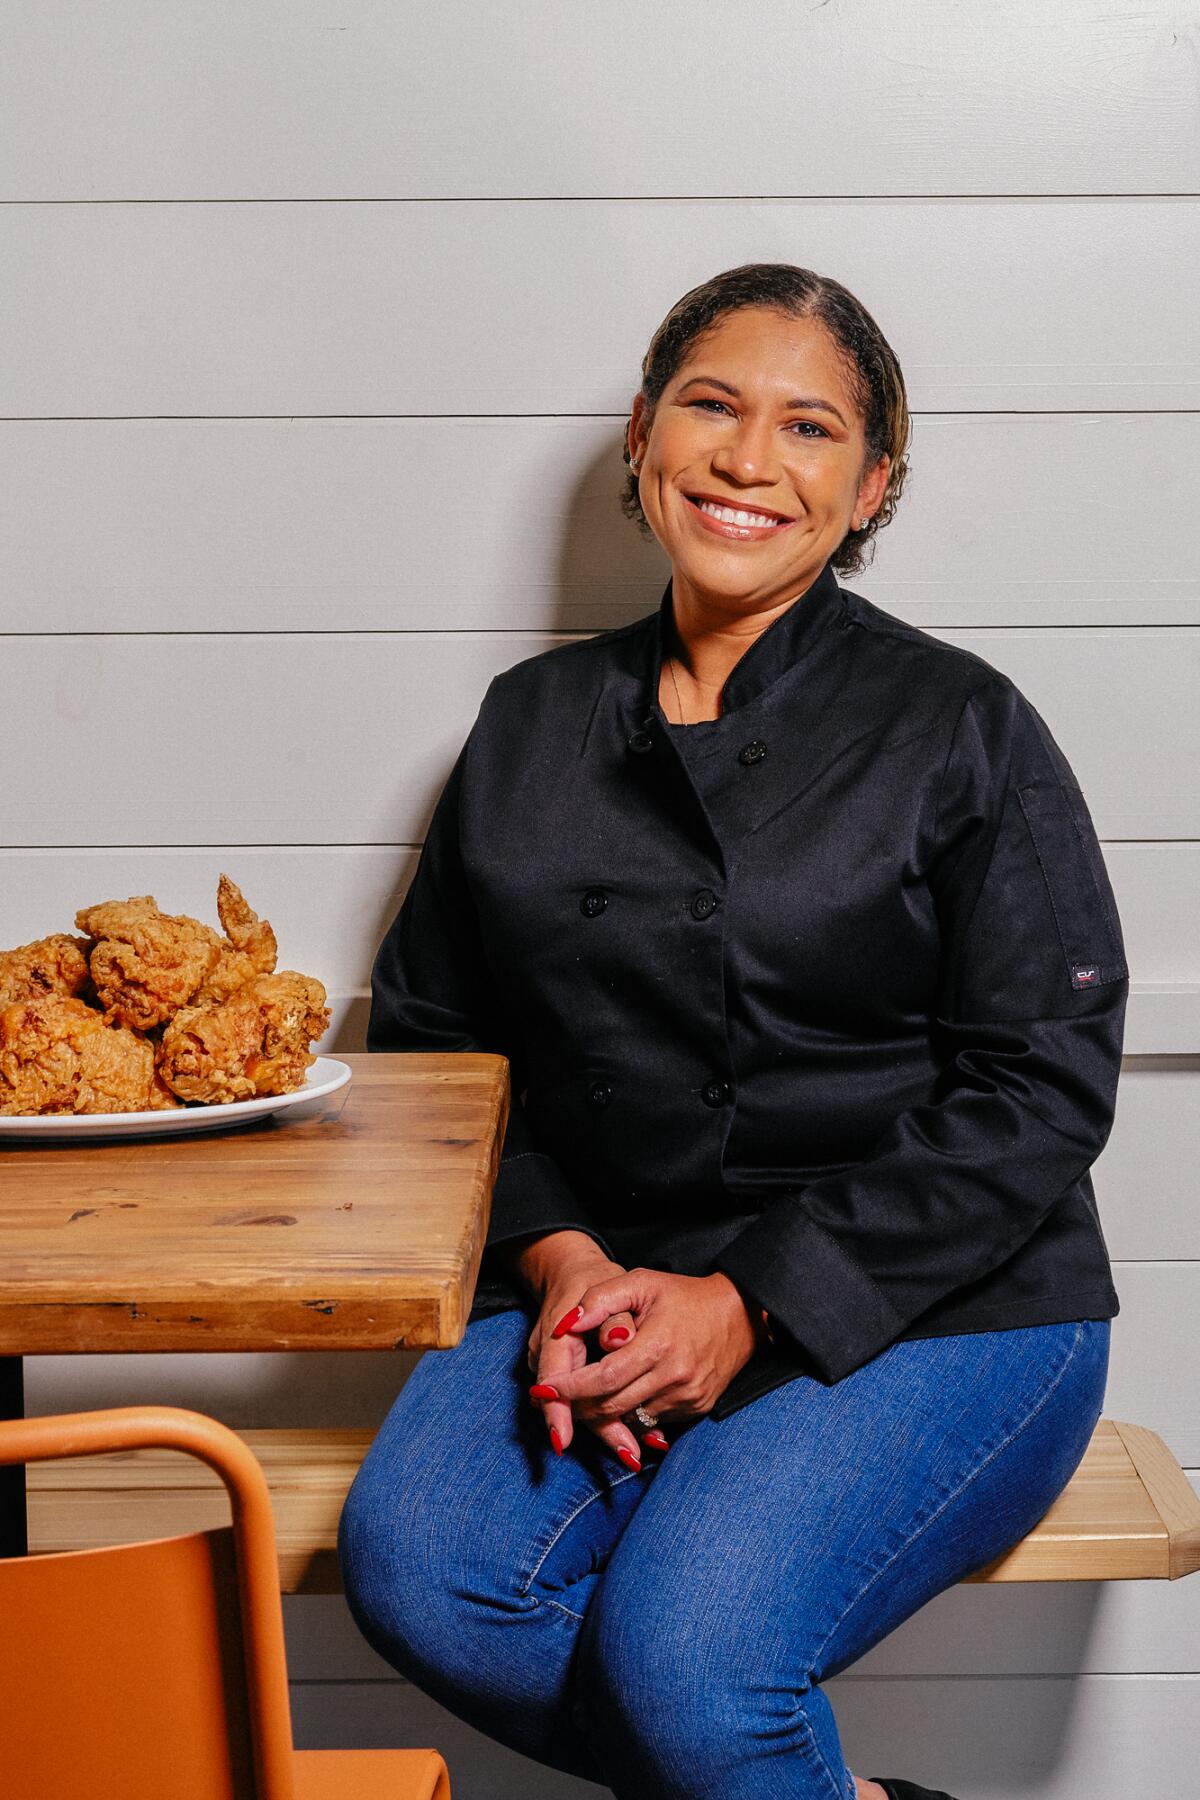 A woman seated at a table next to a plate piled high with fried chicken.